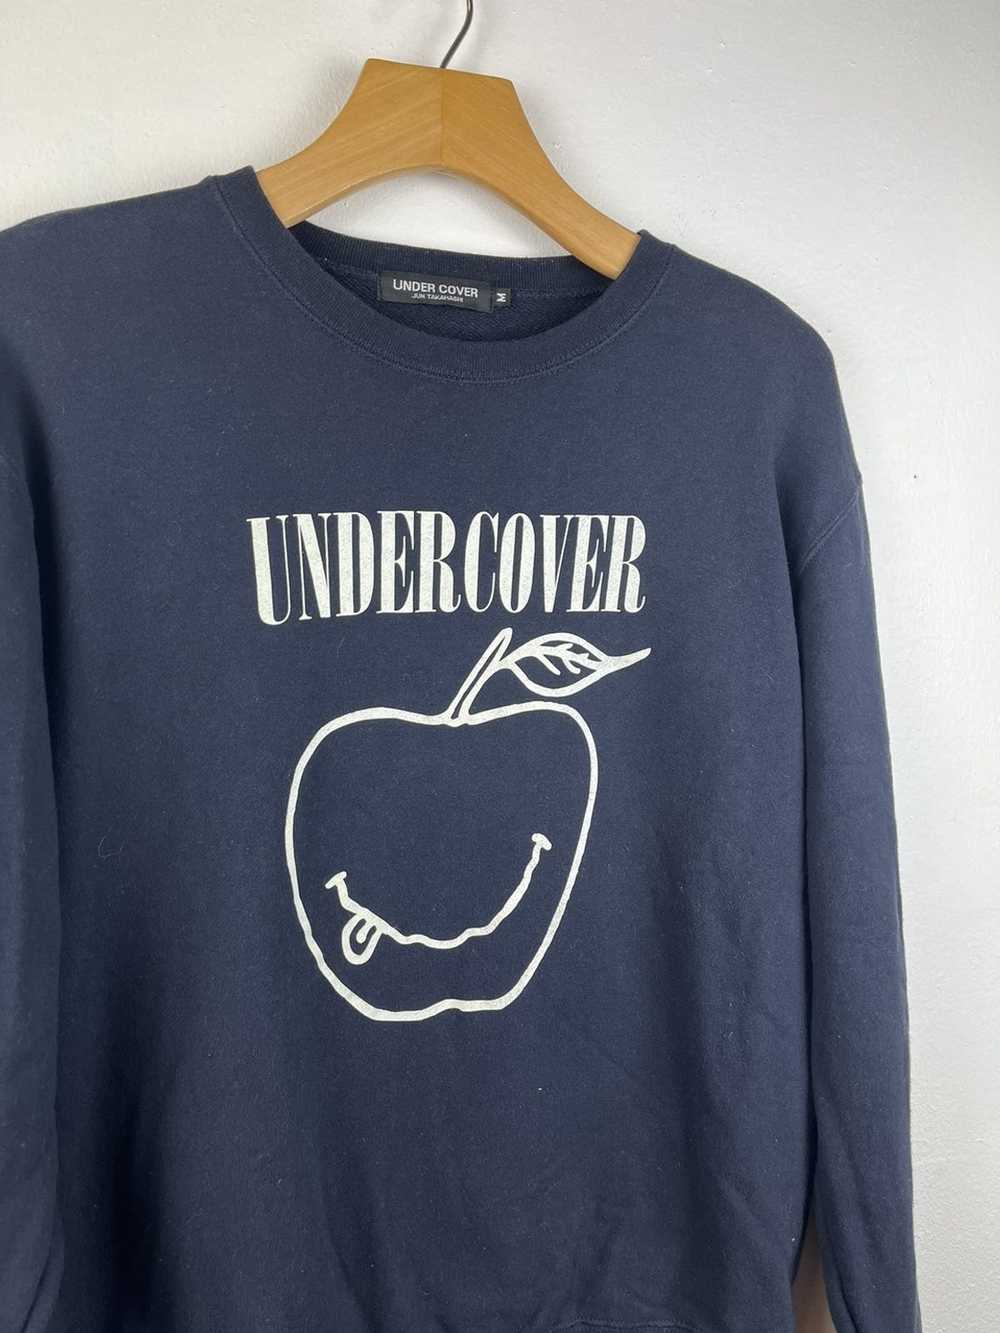 Undercover Undercover Nirvana Apple Sweater - image 2